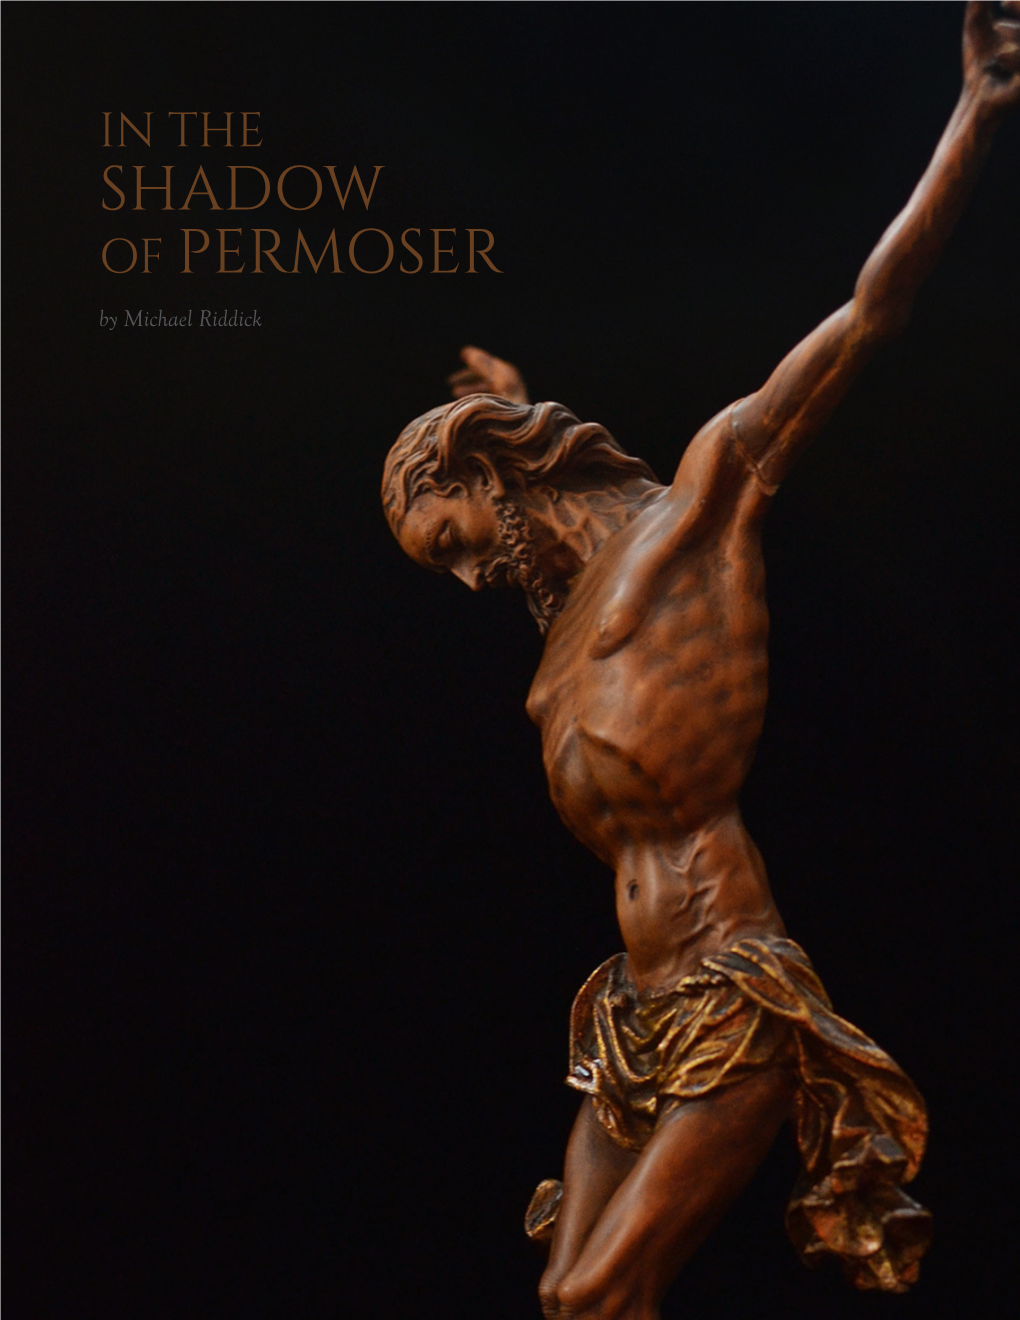 SHADOW of PERMOSER by Michael Riddick in the SHADOW of PERMOSER